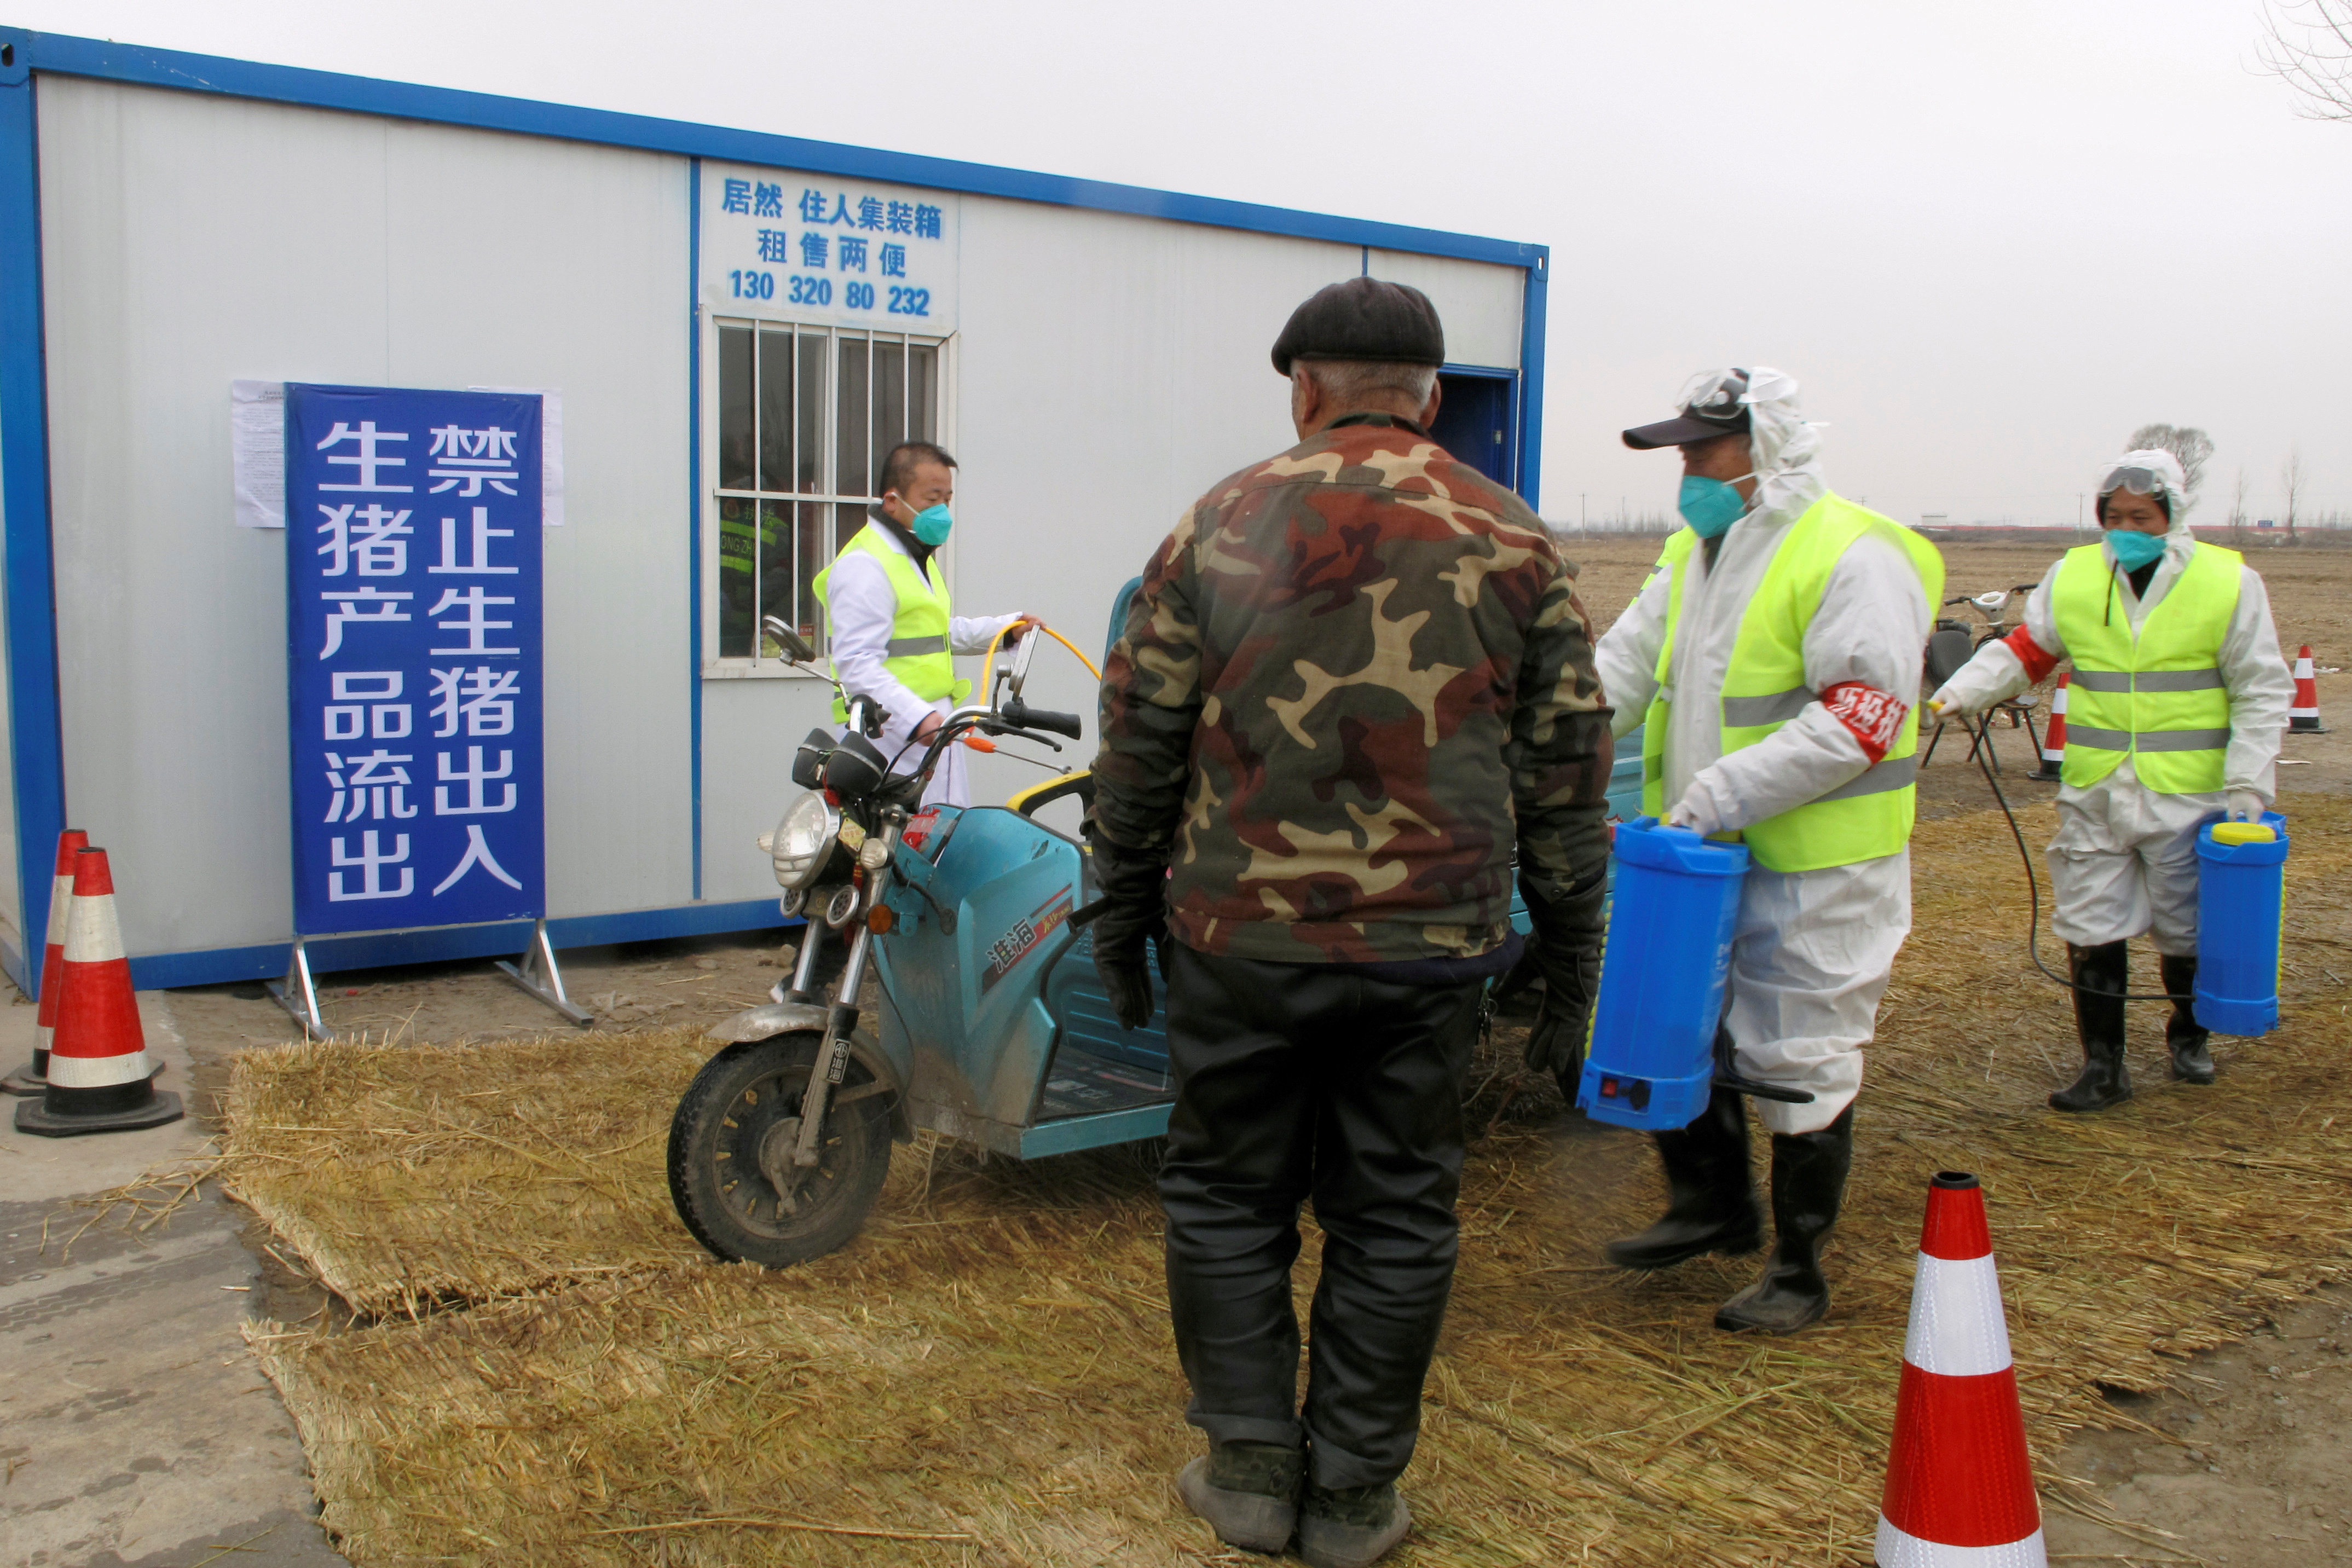 Workers disinfect a vehicle at a checkpoint on a road leading to a farm where African swine fever was detected in Xushui